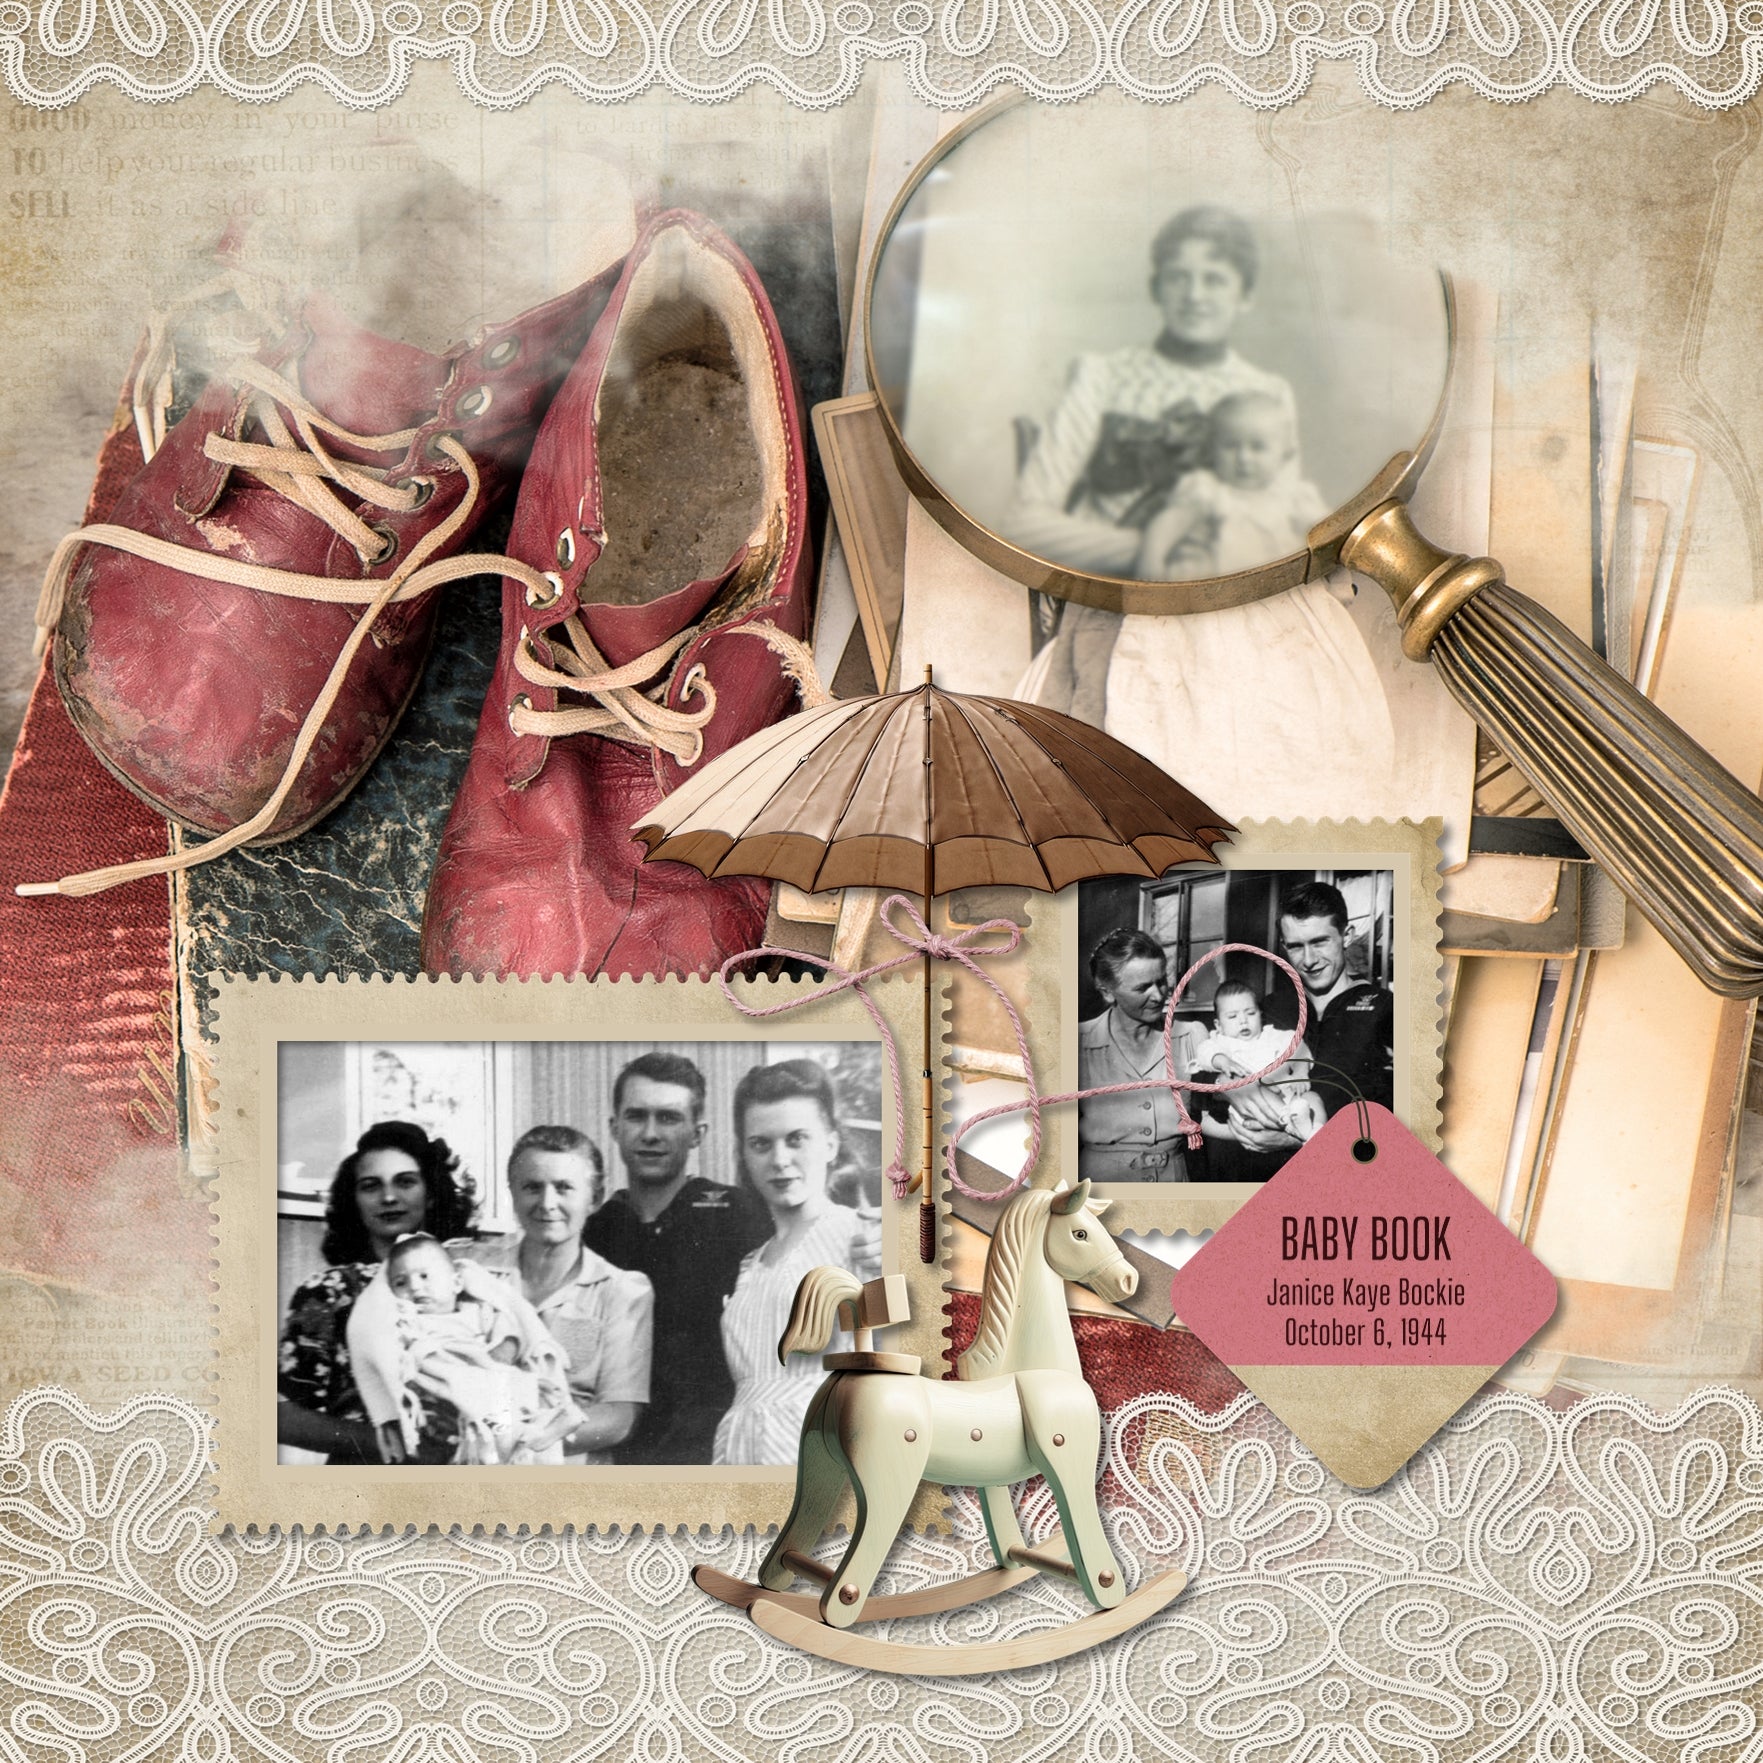 Great for genealogy and family history albums and keepsake digital art pages, these realistic antique digital scrapbooking embellishments, pretty textured papers, alpha sets, word art, and masked photo overlays by Lucky Girl Creative digital art are perfect for layering with your antique photographs to give that realistic vintage look. Whether you love browsing through a flea market, vintage market, rummage or garage sale, these embellishments will showcase your treasured finds.